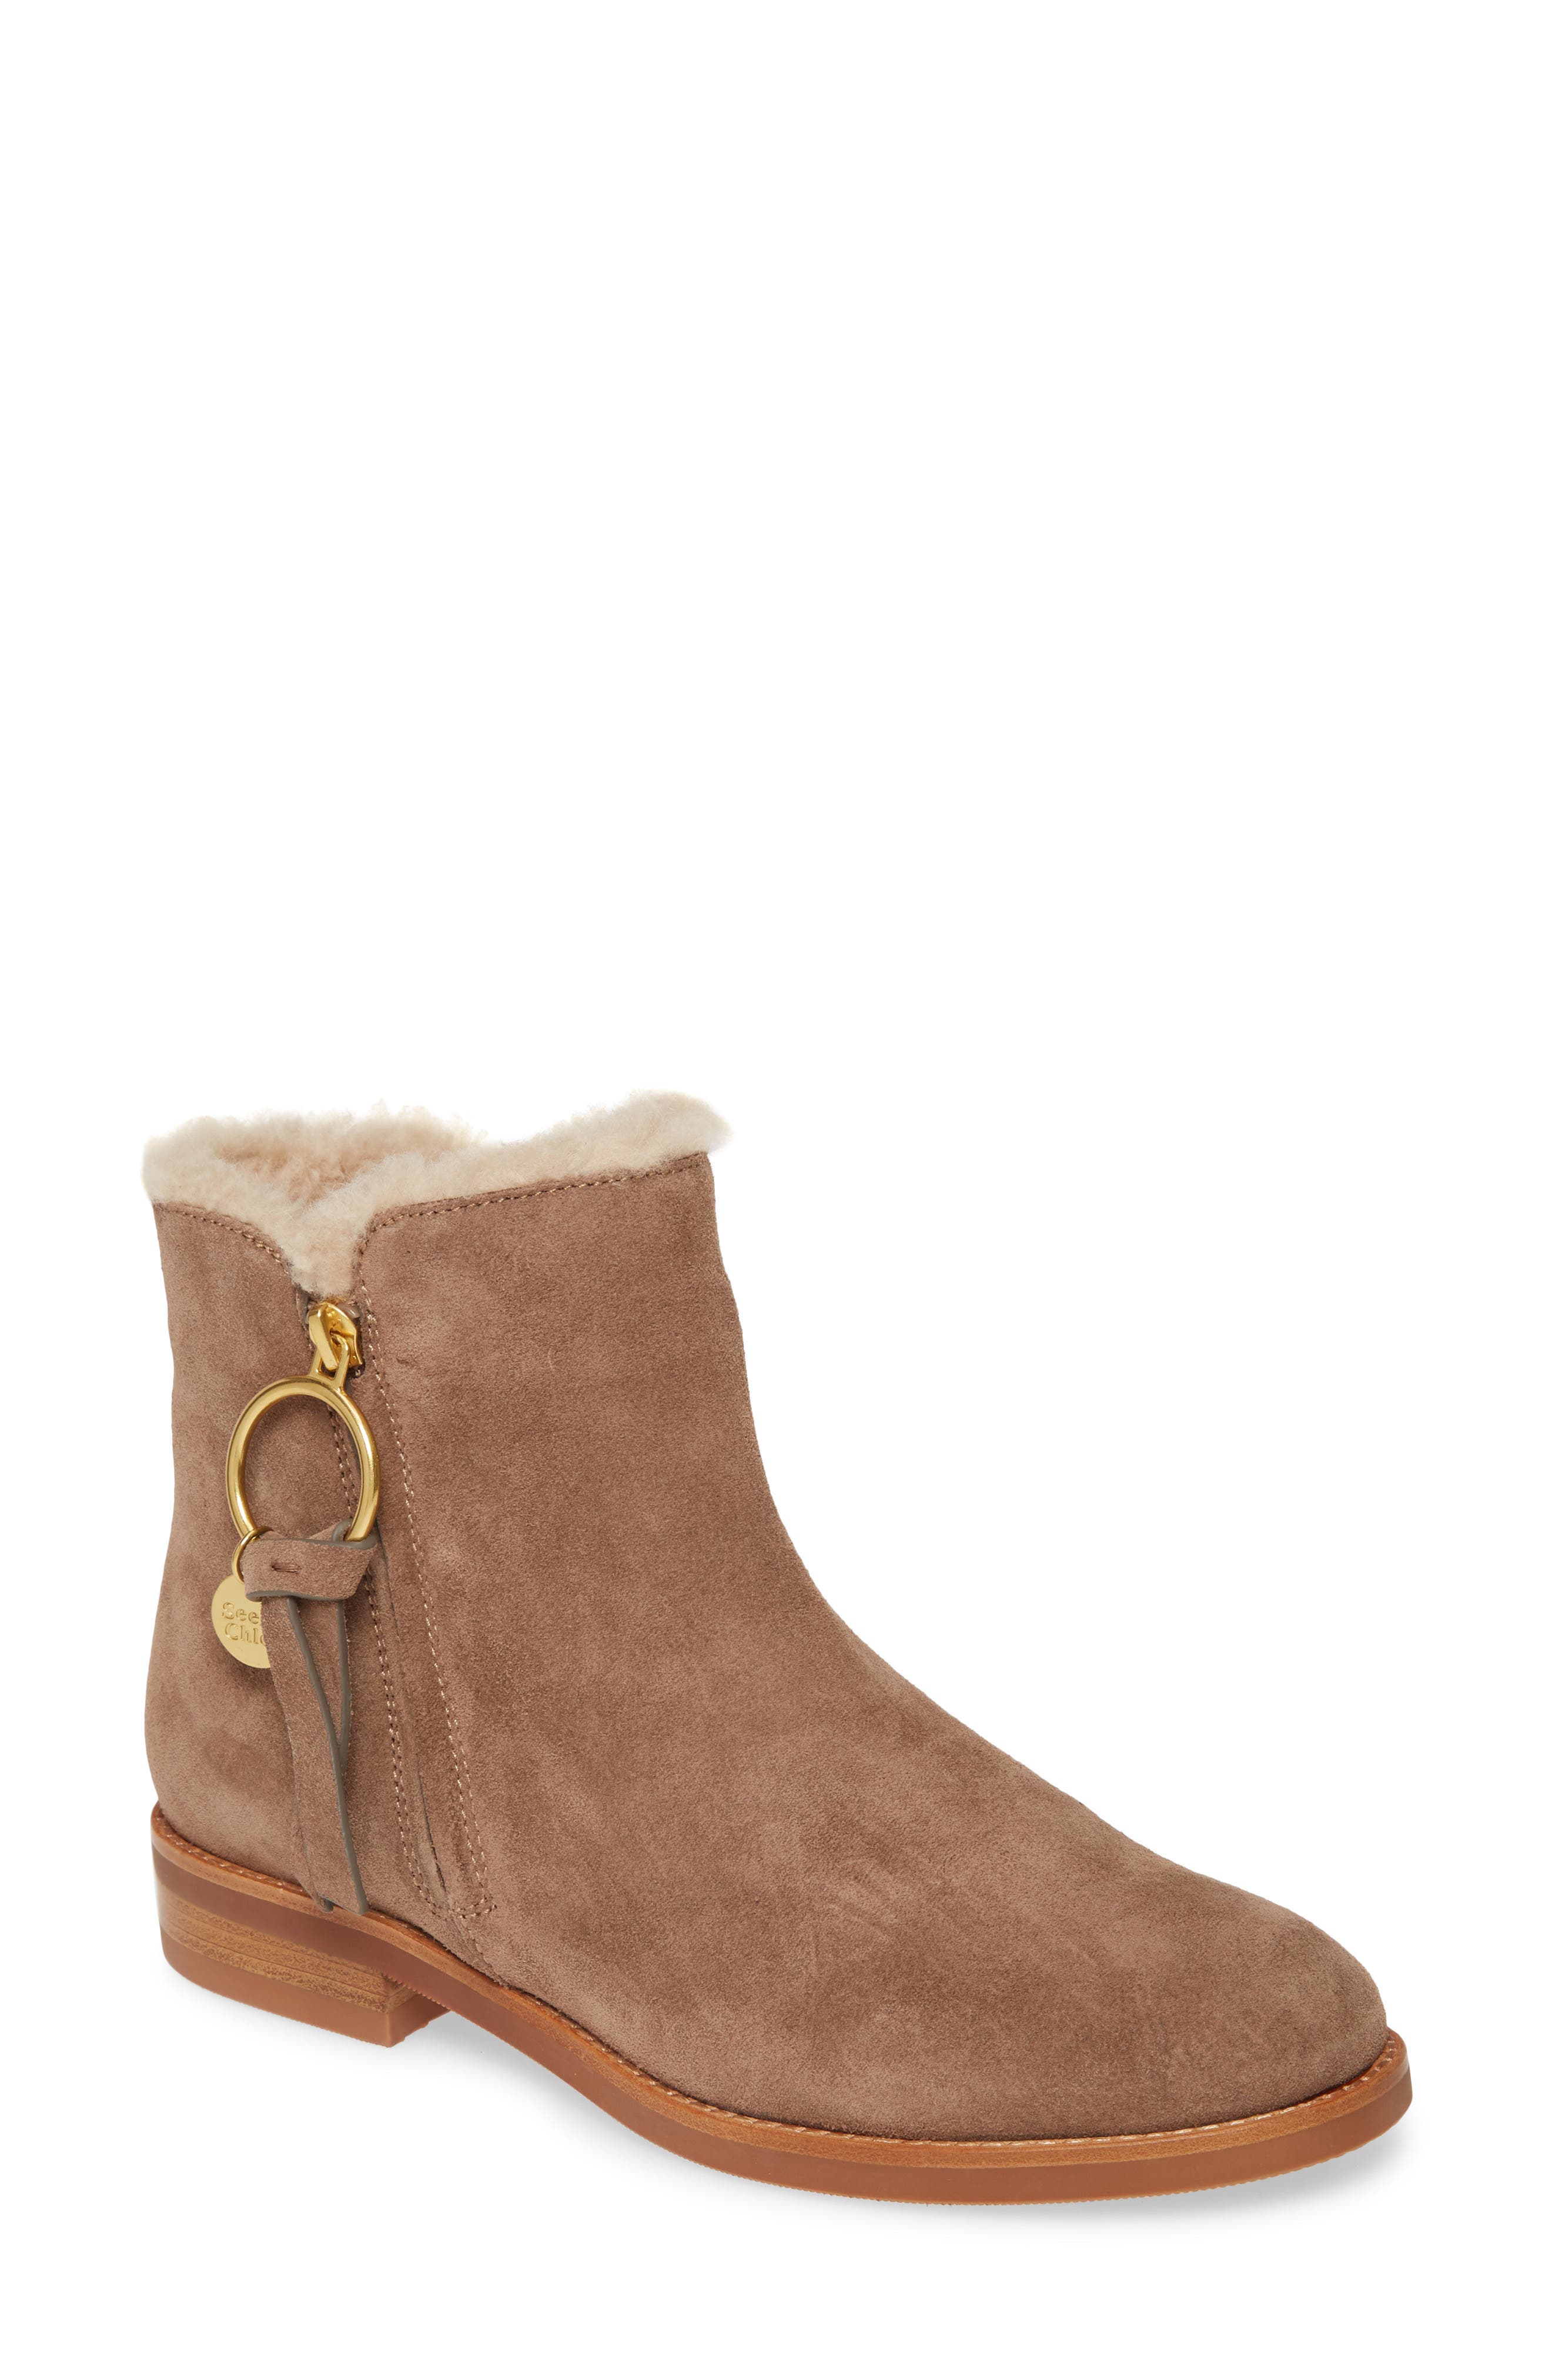 see by chloe louise flat boots